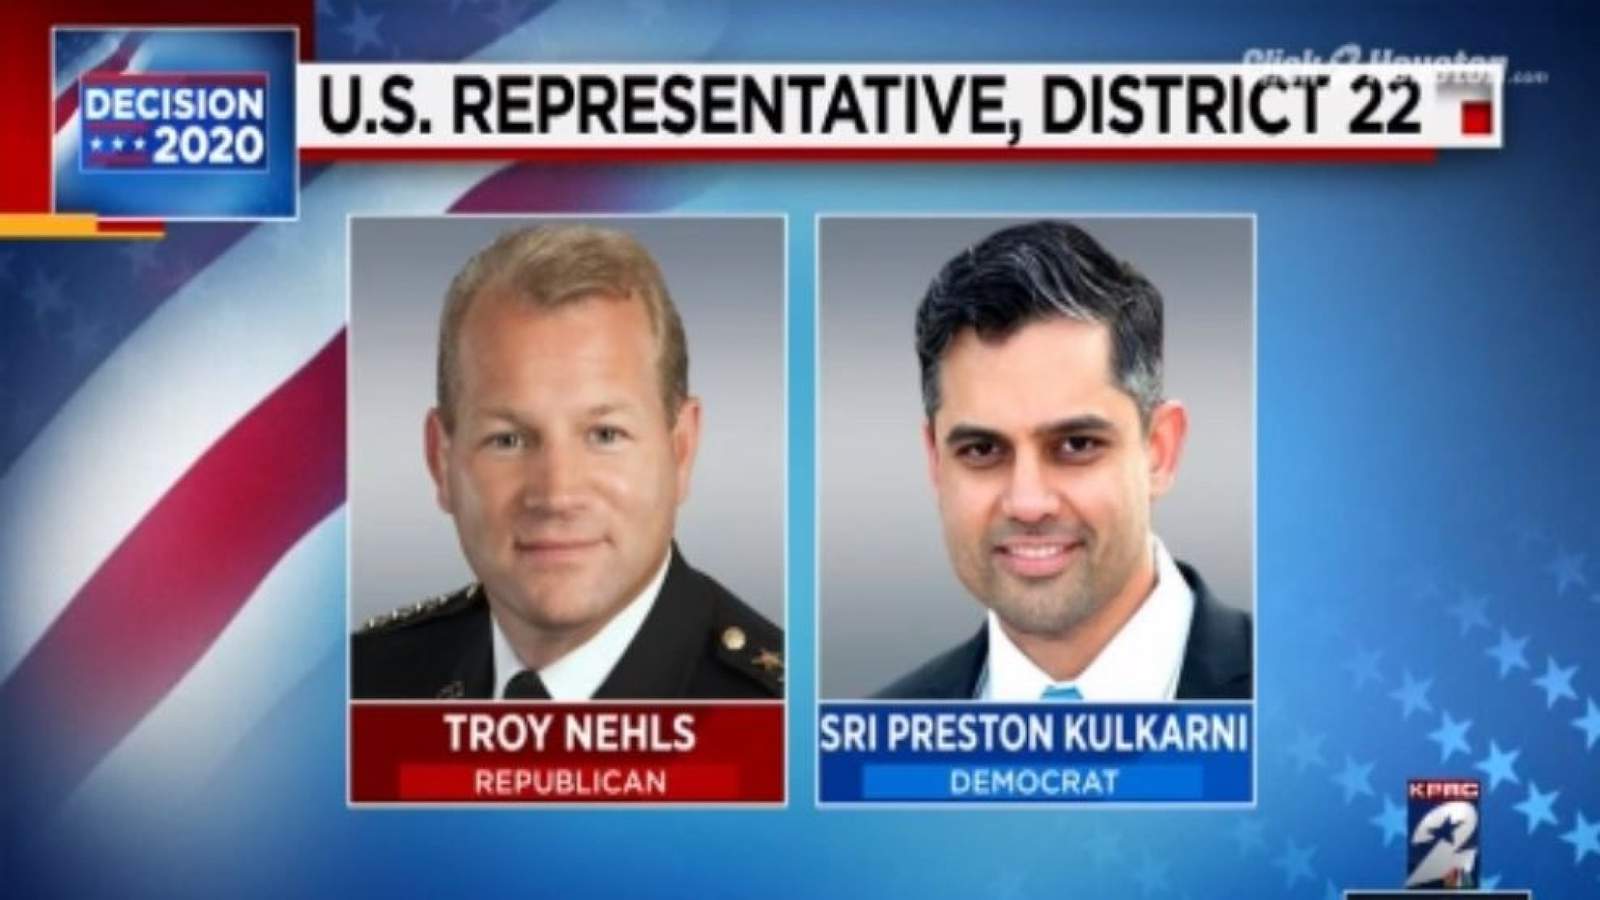 Projection: Troy Nehls wins House District 22